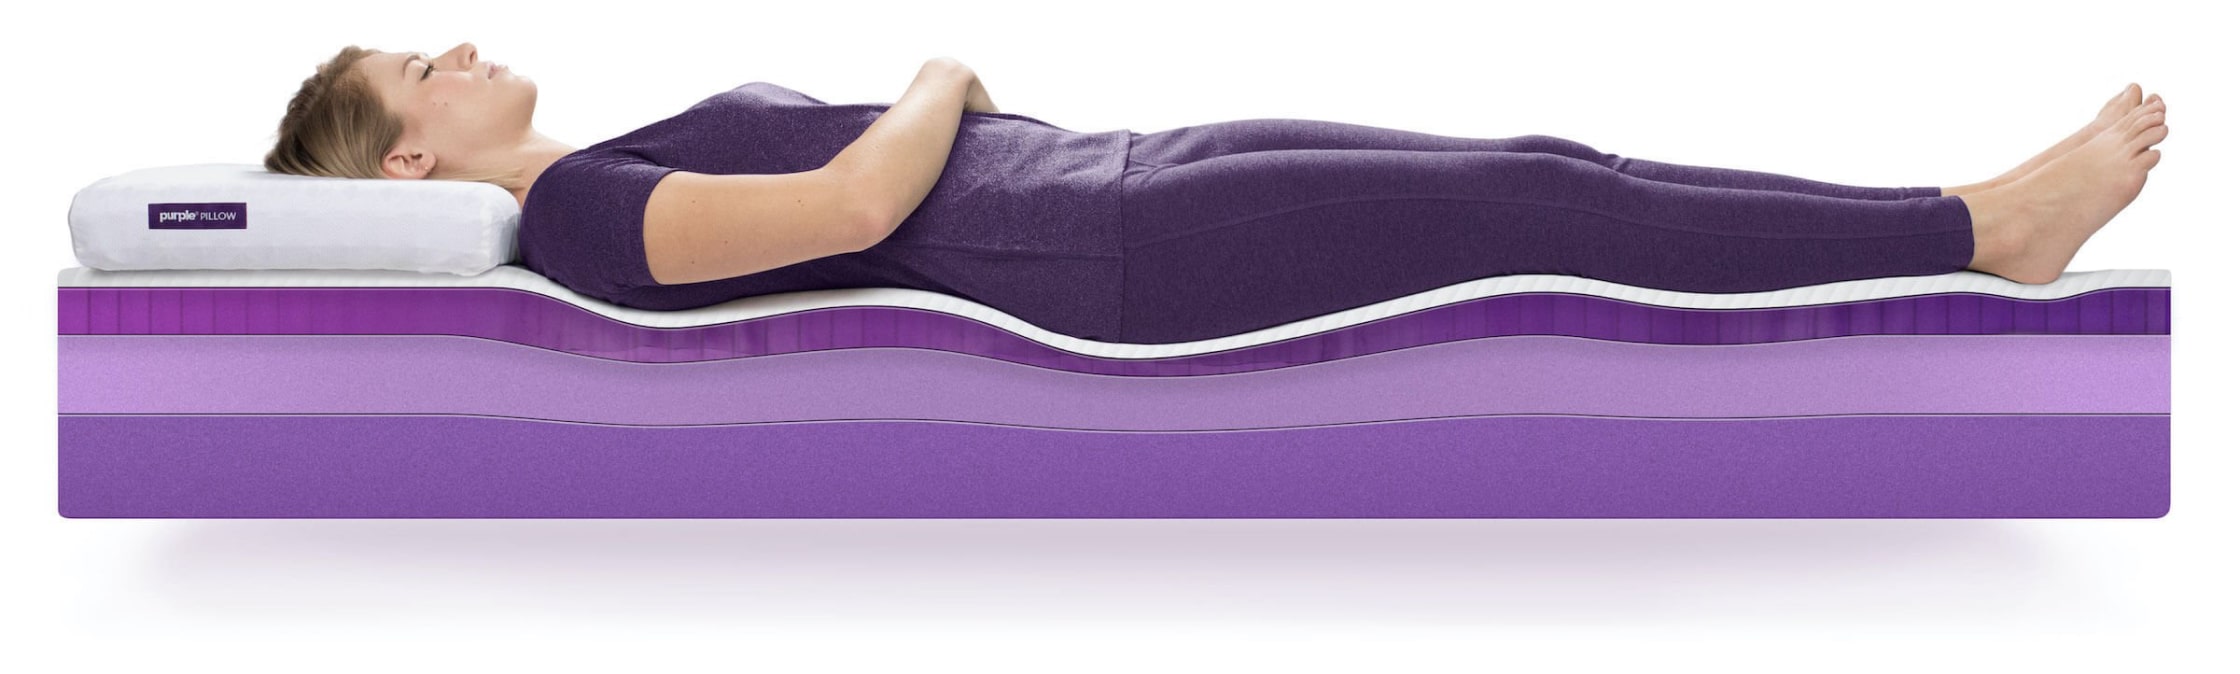 What's So Great About the Purple Mattress?